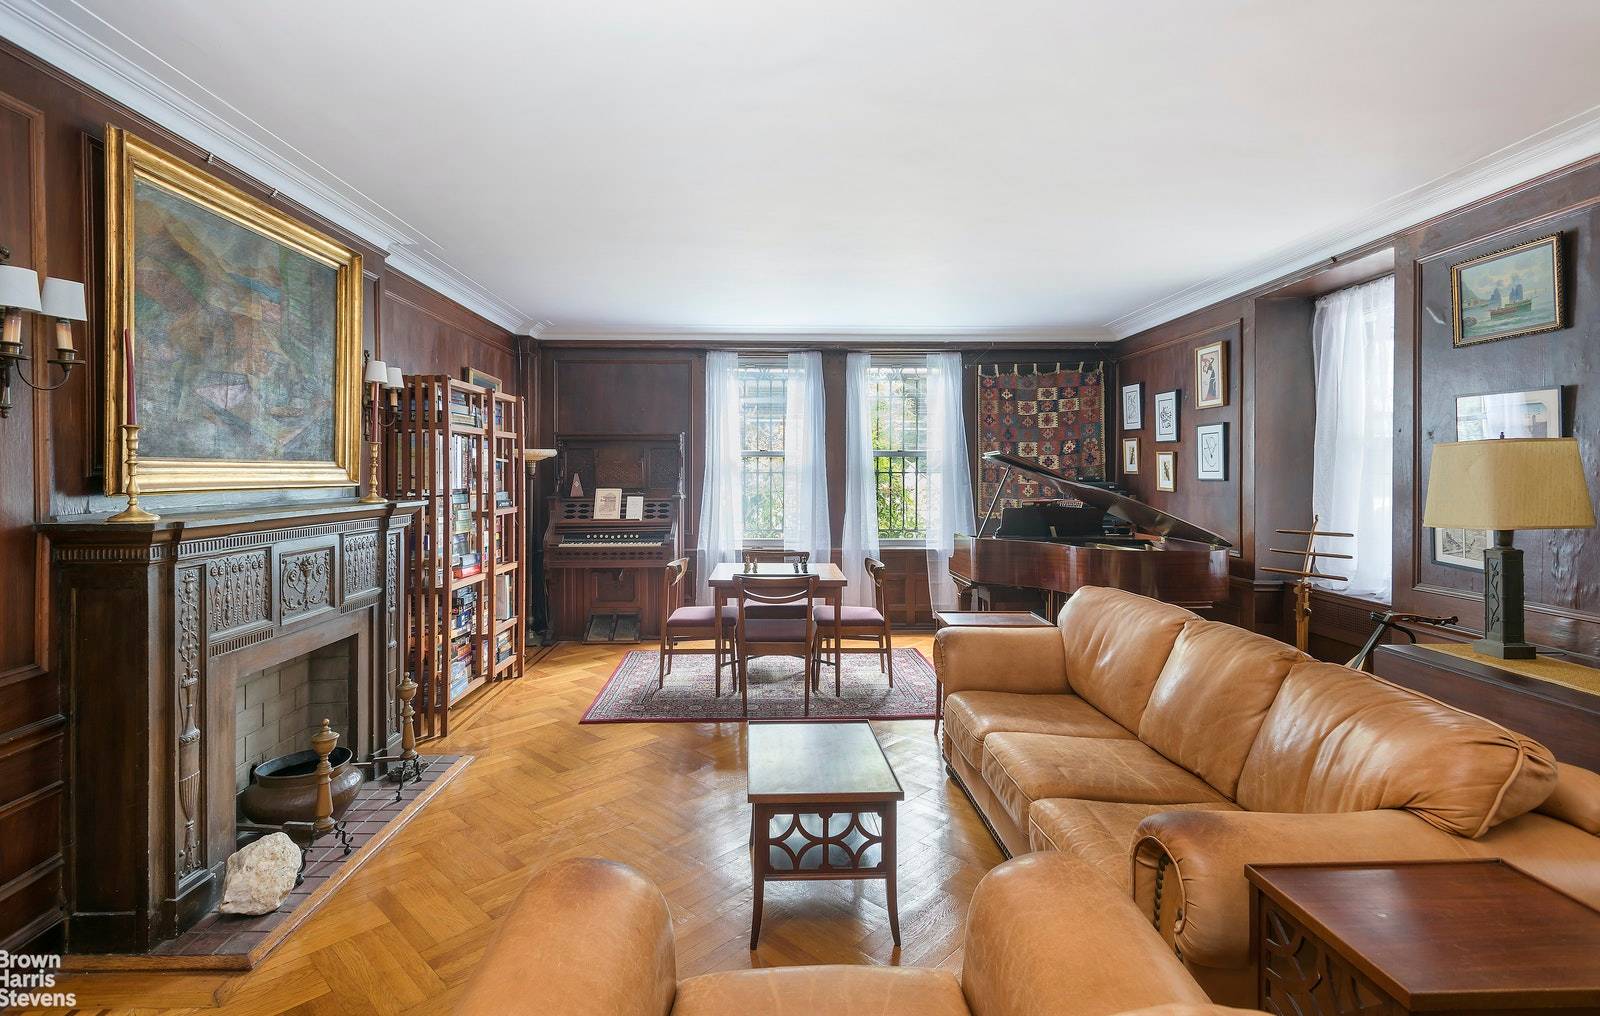 Welcome to a your gracious maisonette on the park with the space and privacy of a townhouse and the security and convenience of a white glove exclusive coop.